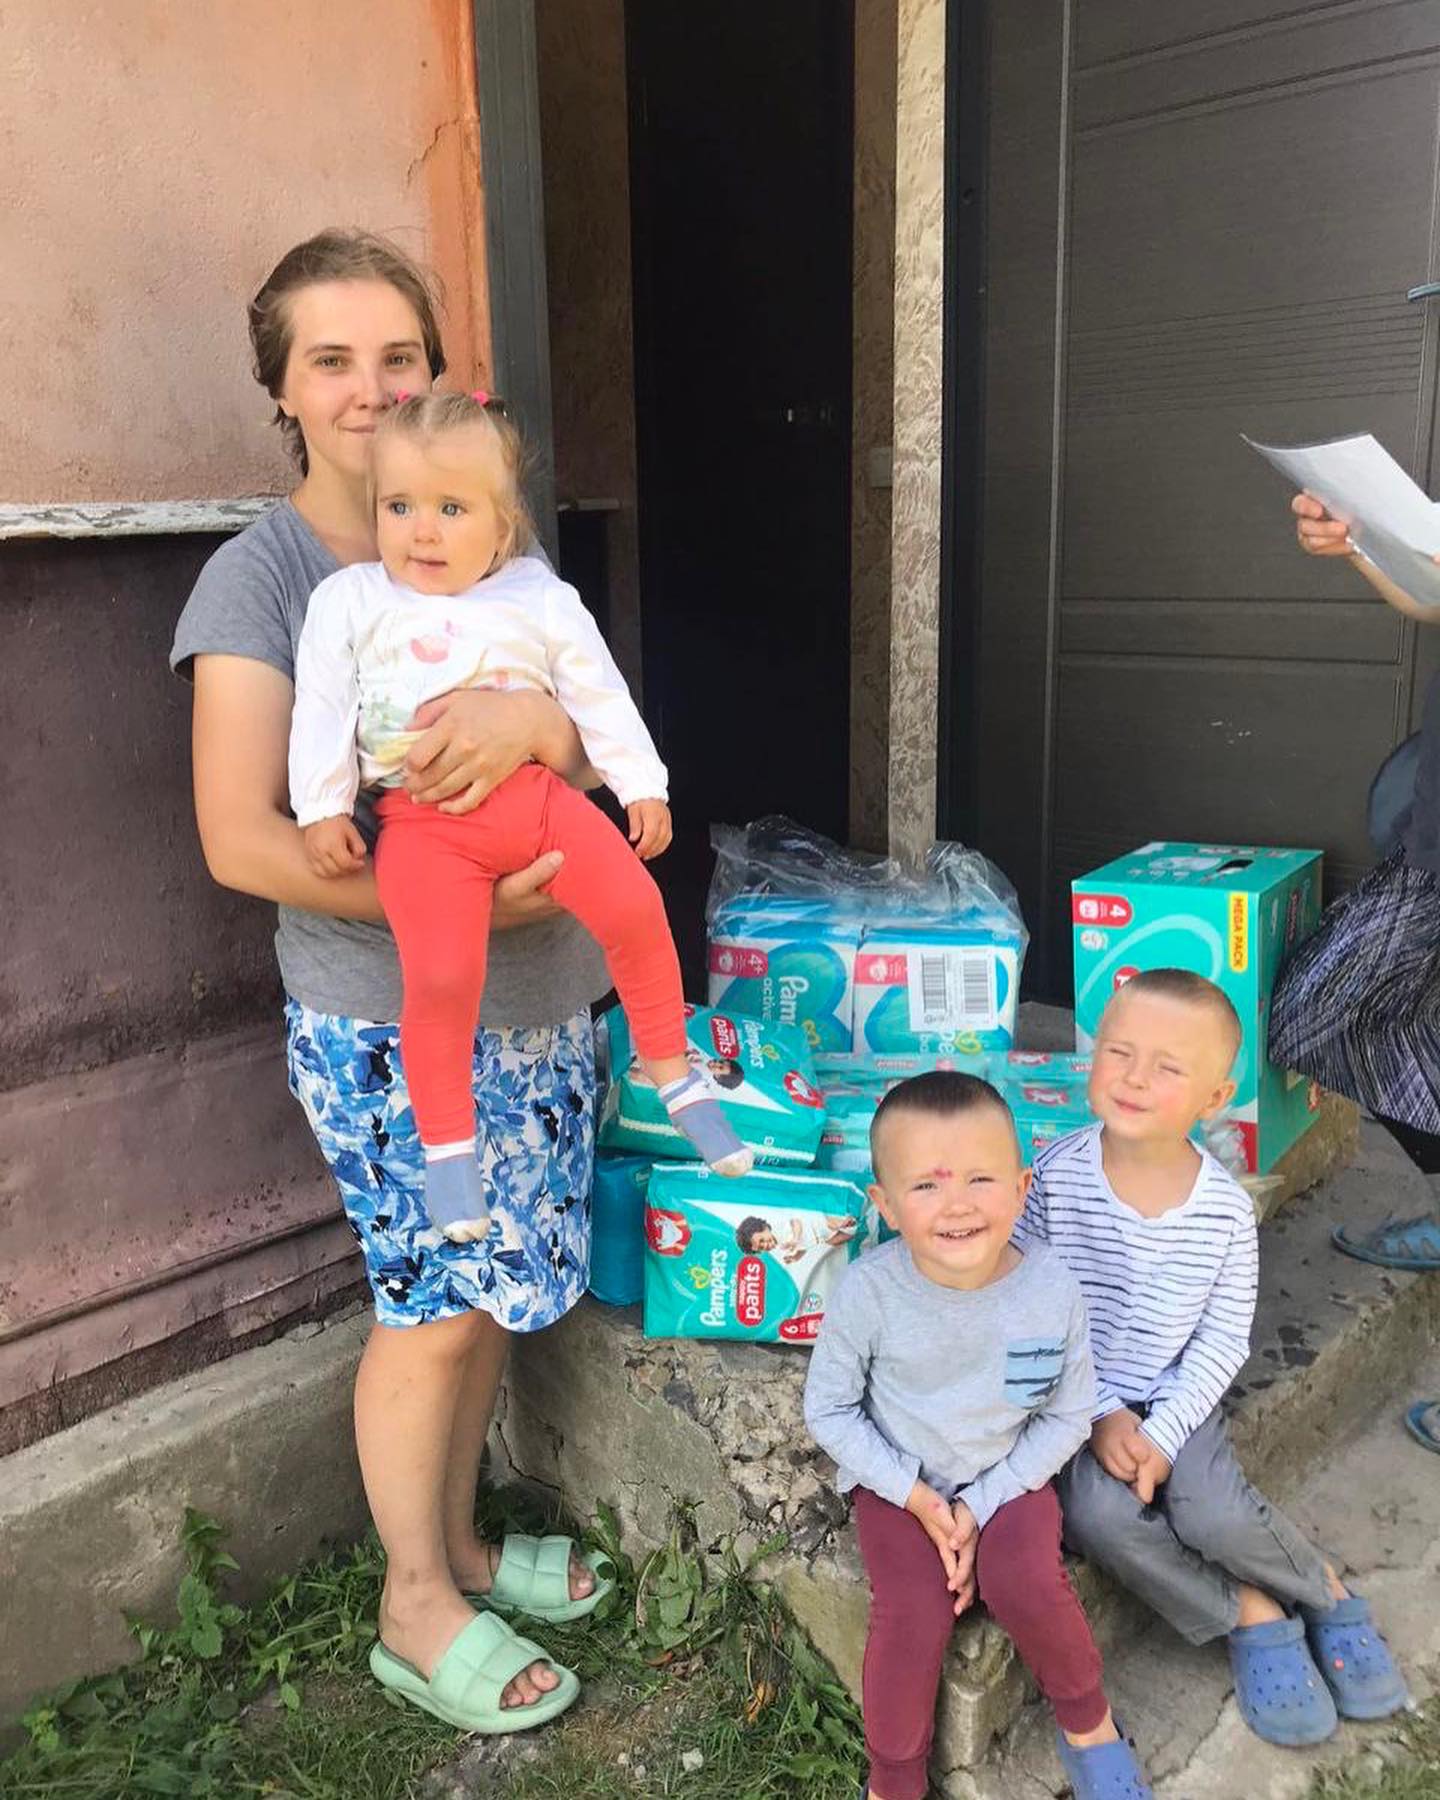 A group of women and children standing in front of a house with boxes of diapers.